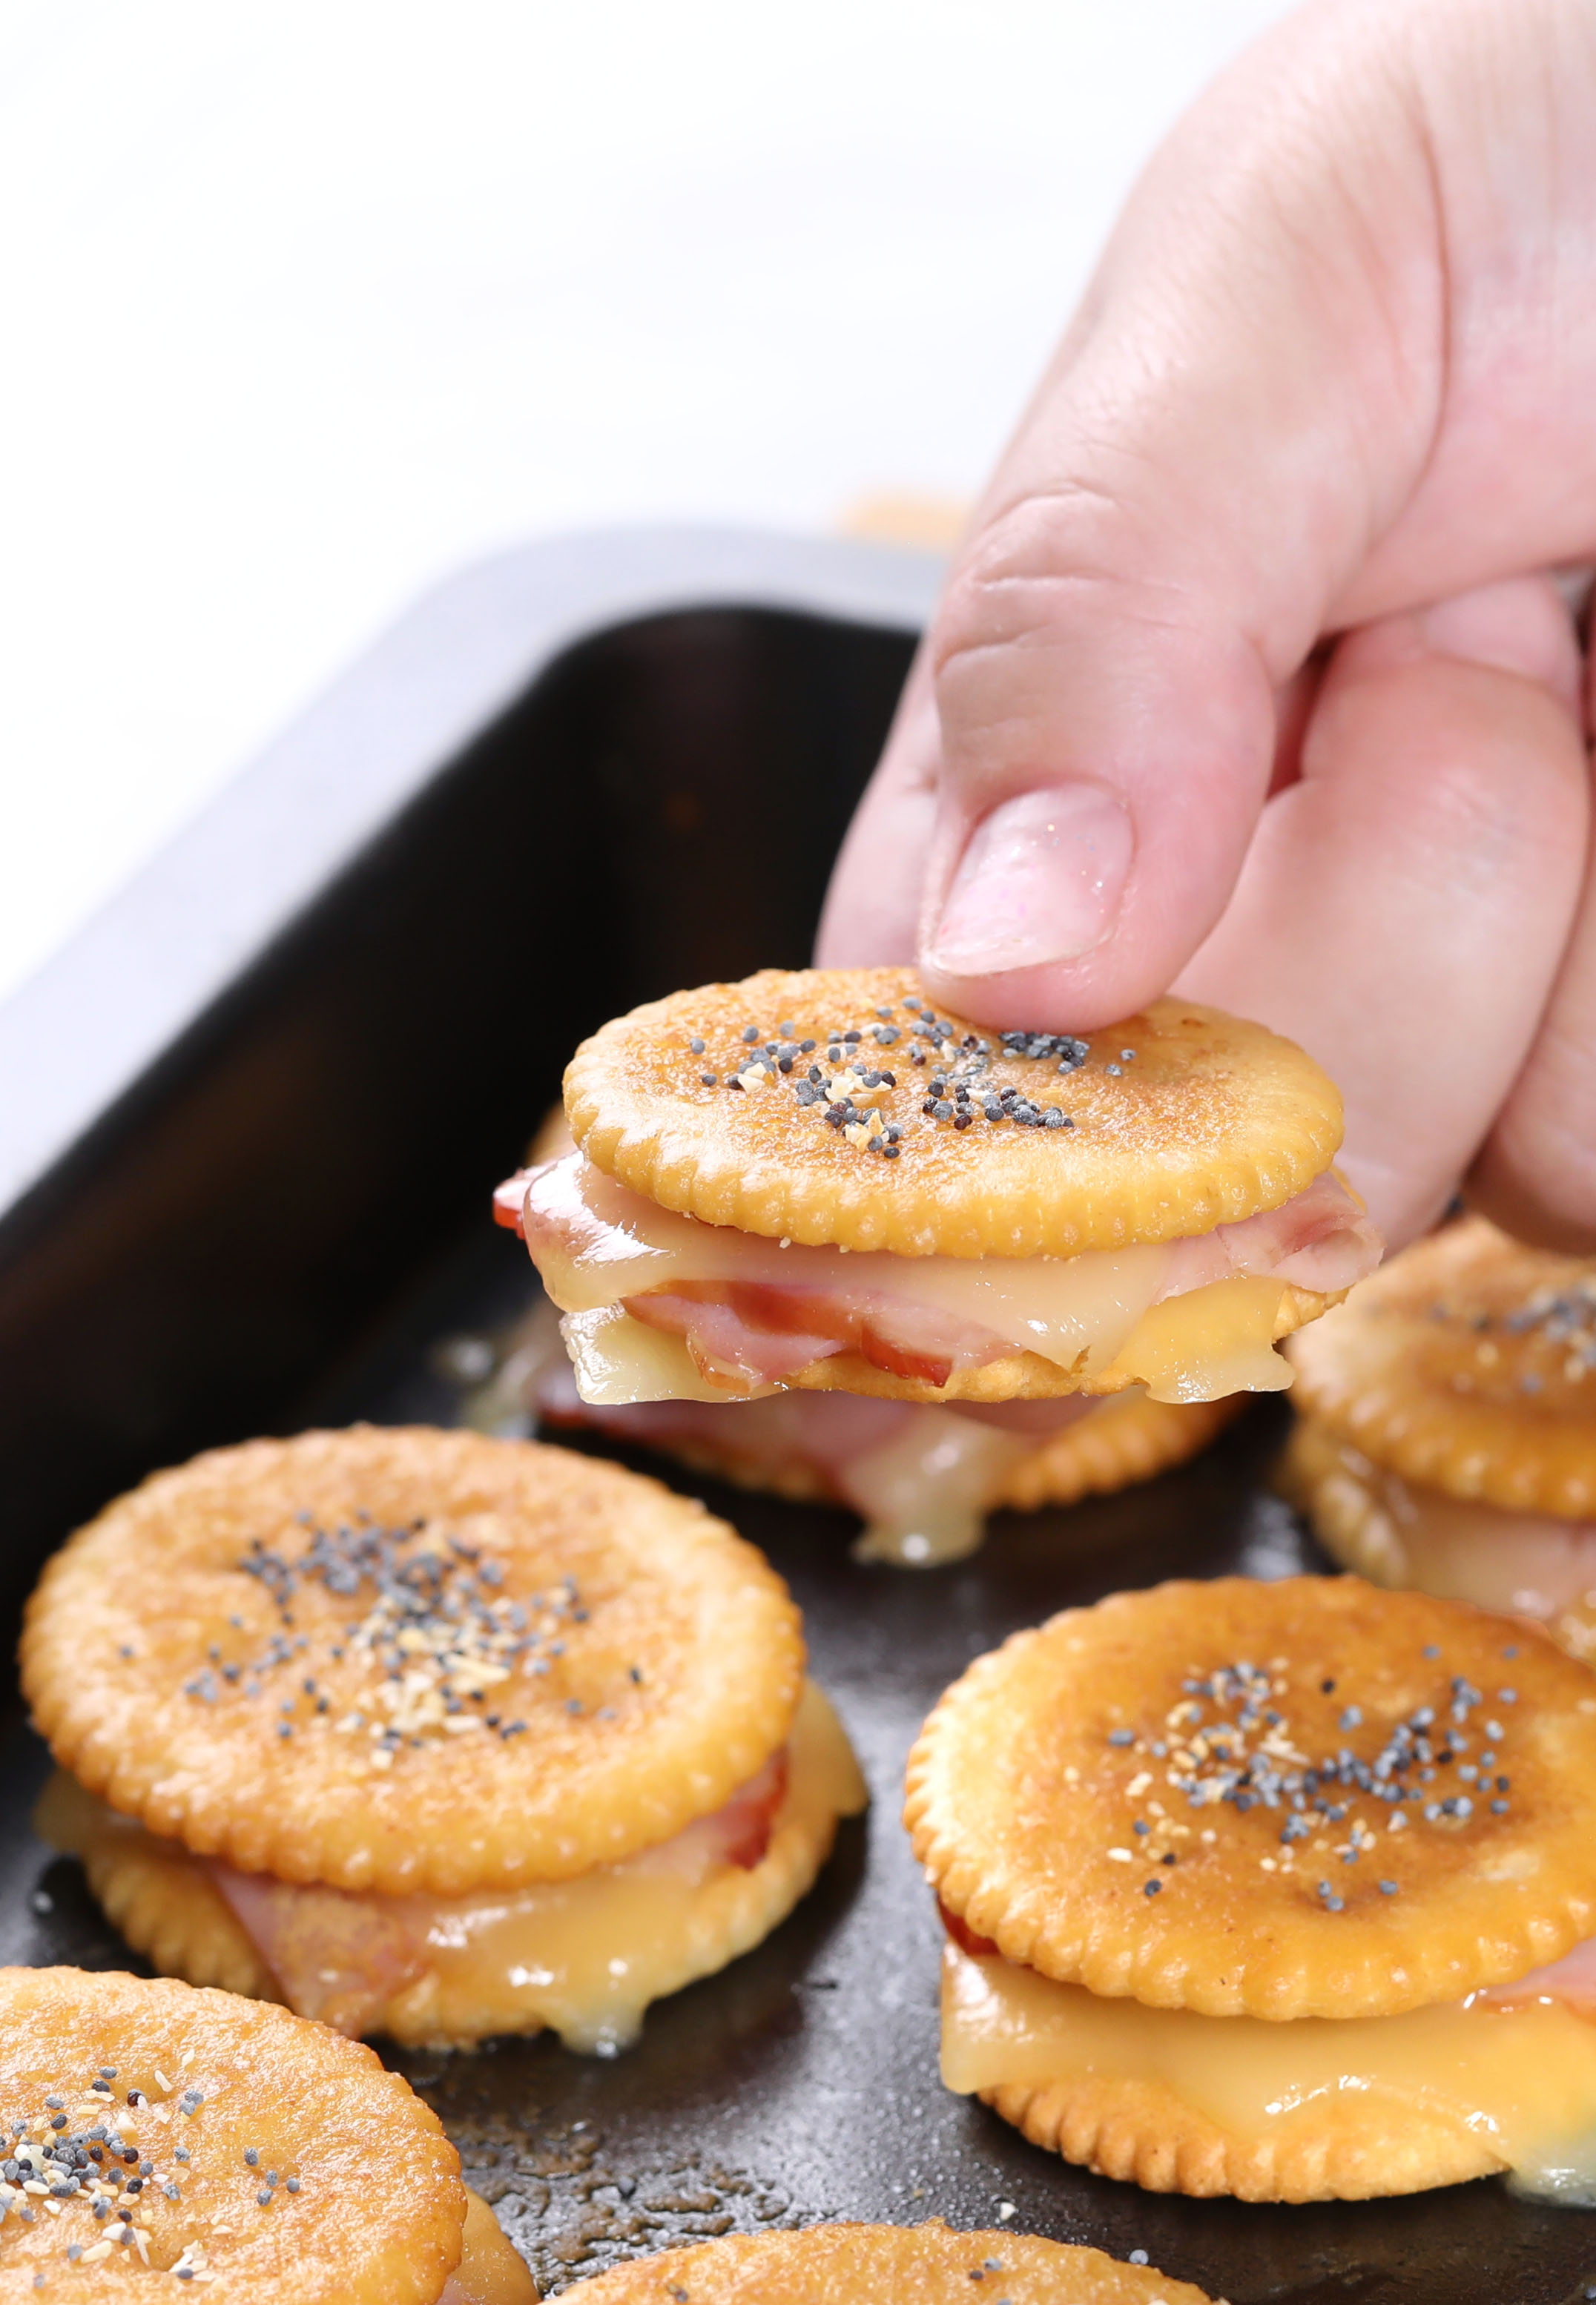 Ham and Cheese Ritz Cracker Sandwiches – fun little treats to serve for Christmas appetizers or game day snacking. Always a crowd favorite with layers of black forest Ham and Swiss cheese sandwiched in buttery crackers then topped with a sensational dijon glaze!